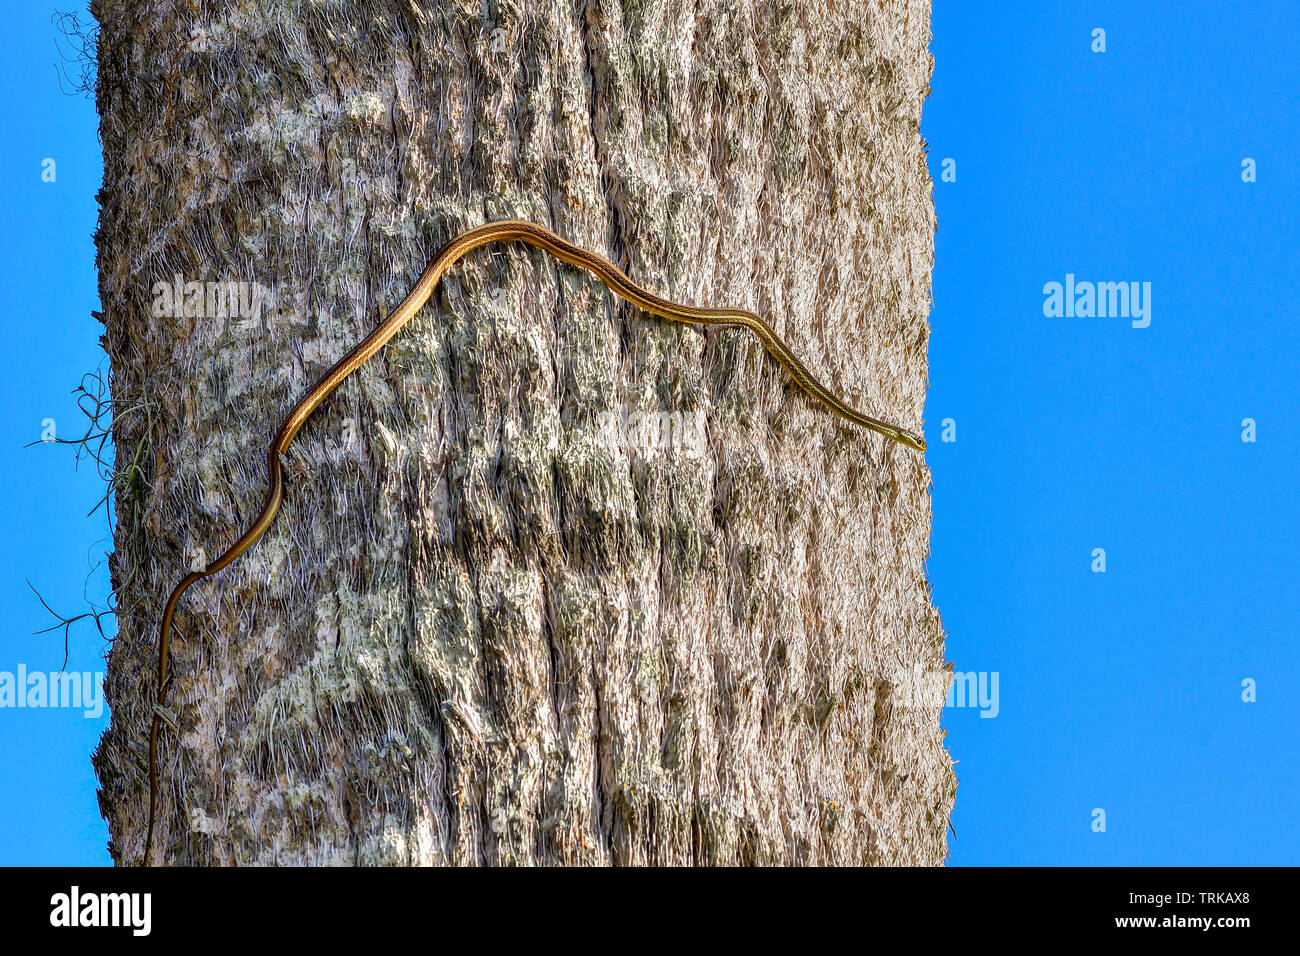 Sometimes it's good to watch above your head and see what's happening there. Peninsula Ribbon Snake climbing on the palm tree. Stock Photo